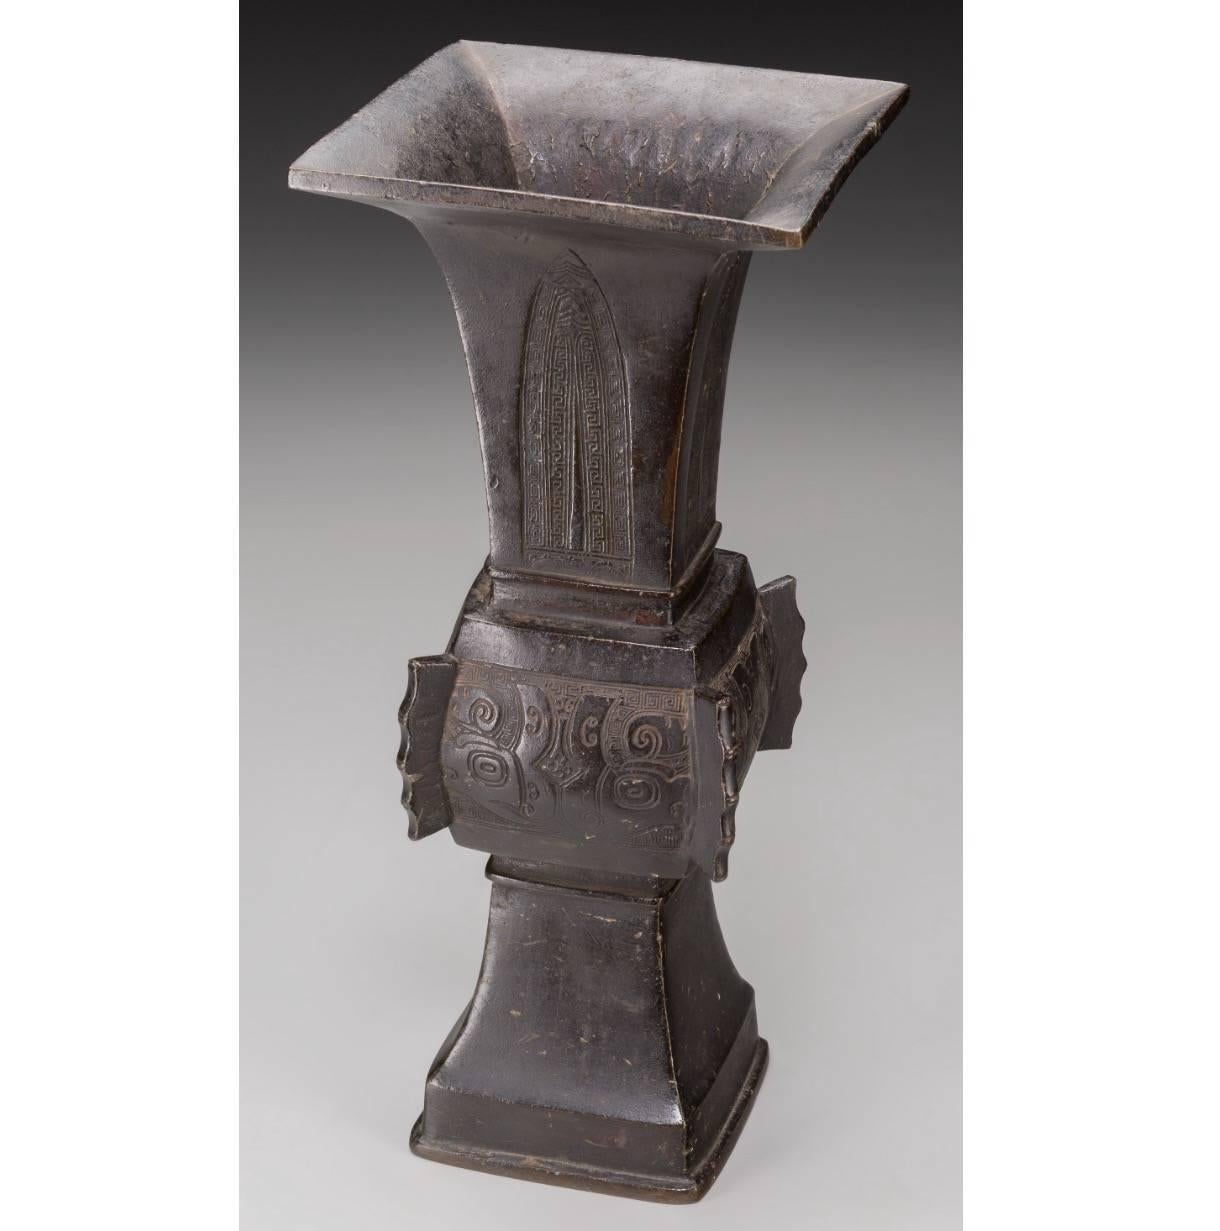 
A Chinese bronze gu-form vase. 17-18th century; 
14-1/2 inches high (36.8 cm.)

The beaker-form vase with incised key decoration within cartouches to the neck, bulbous mid-section with stylized dragonheads within key borders, protruding bamboo